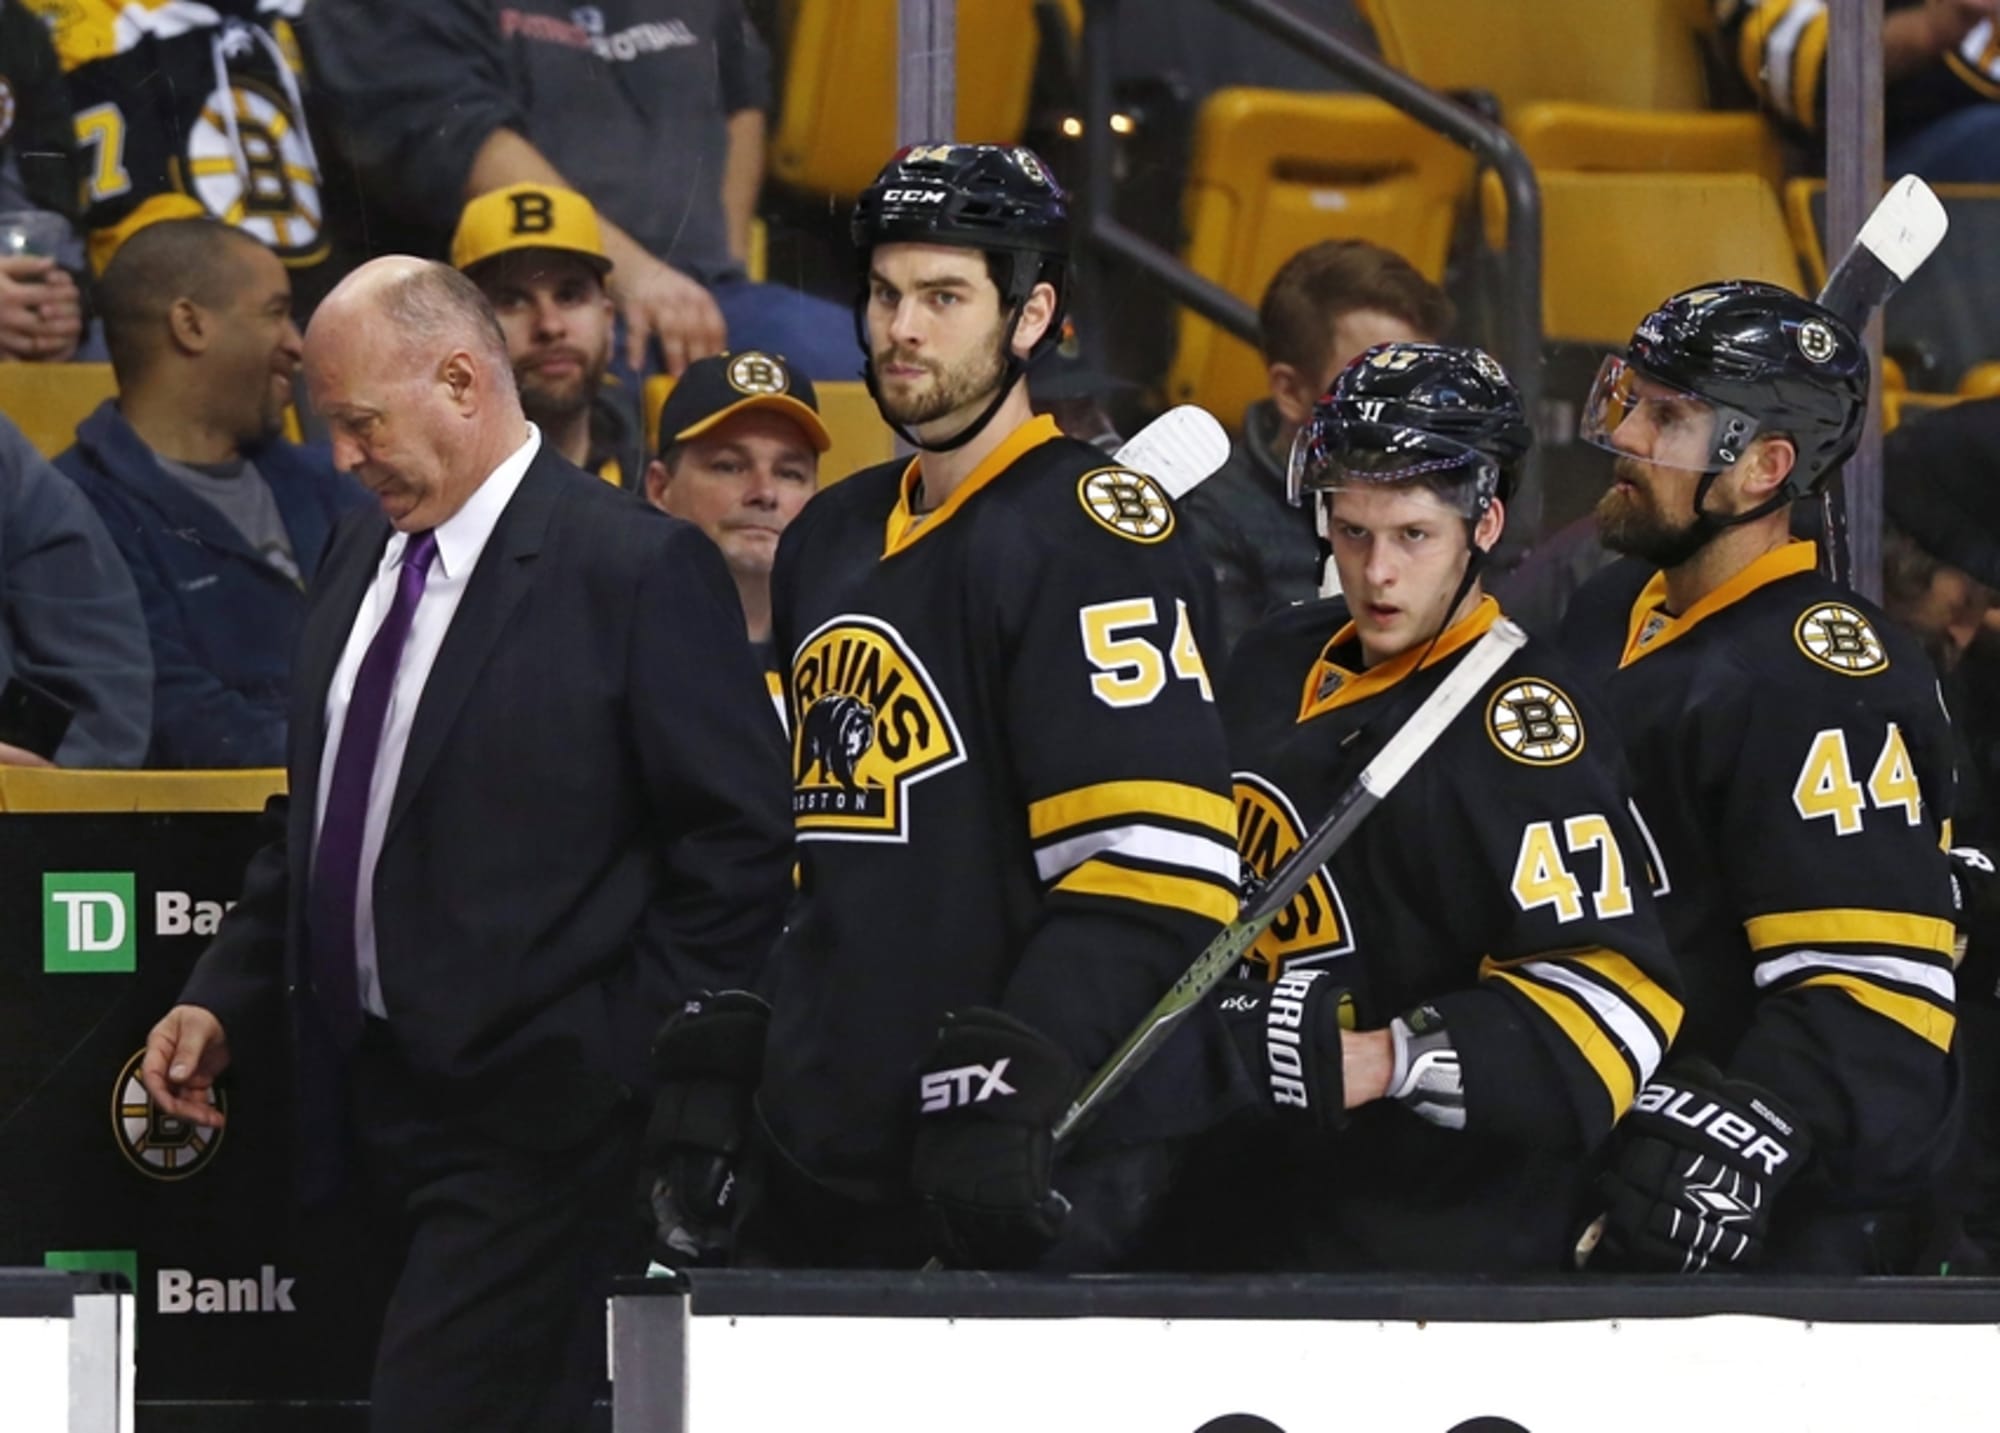 The Bruins Trade Away One Tough Hombre in Adam McQuaid – Branded Sports